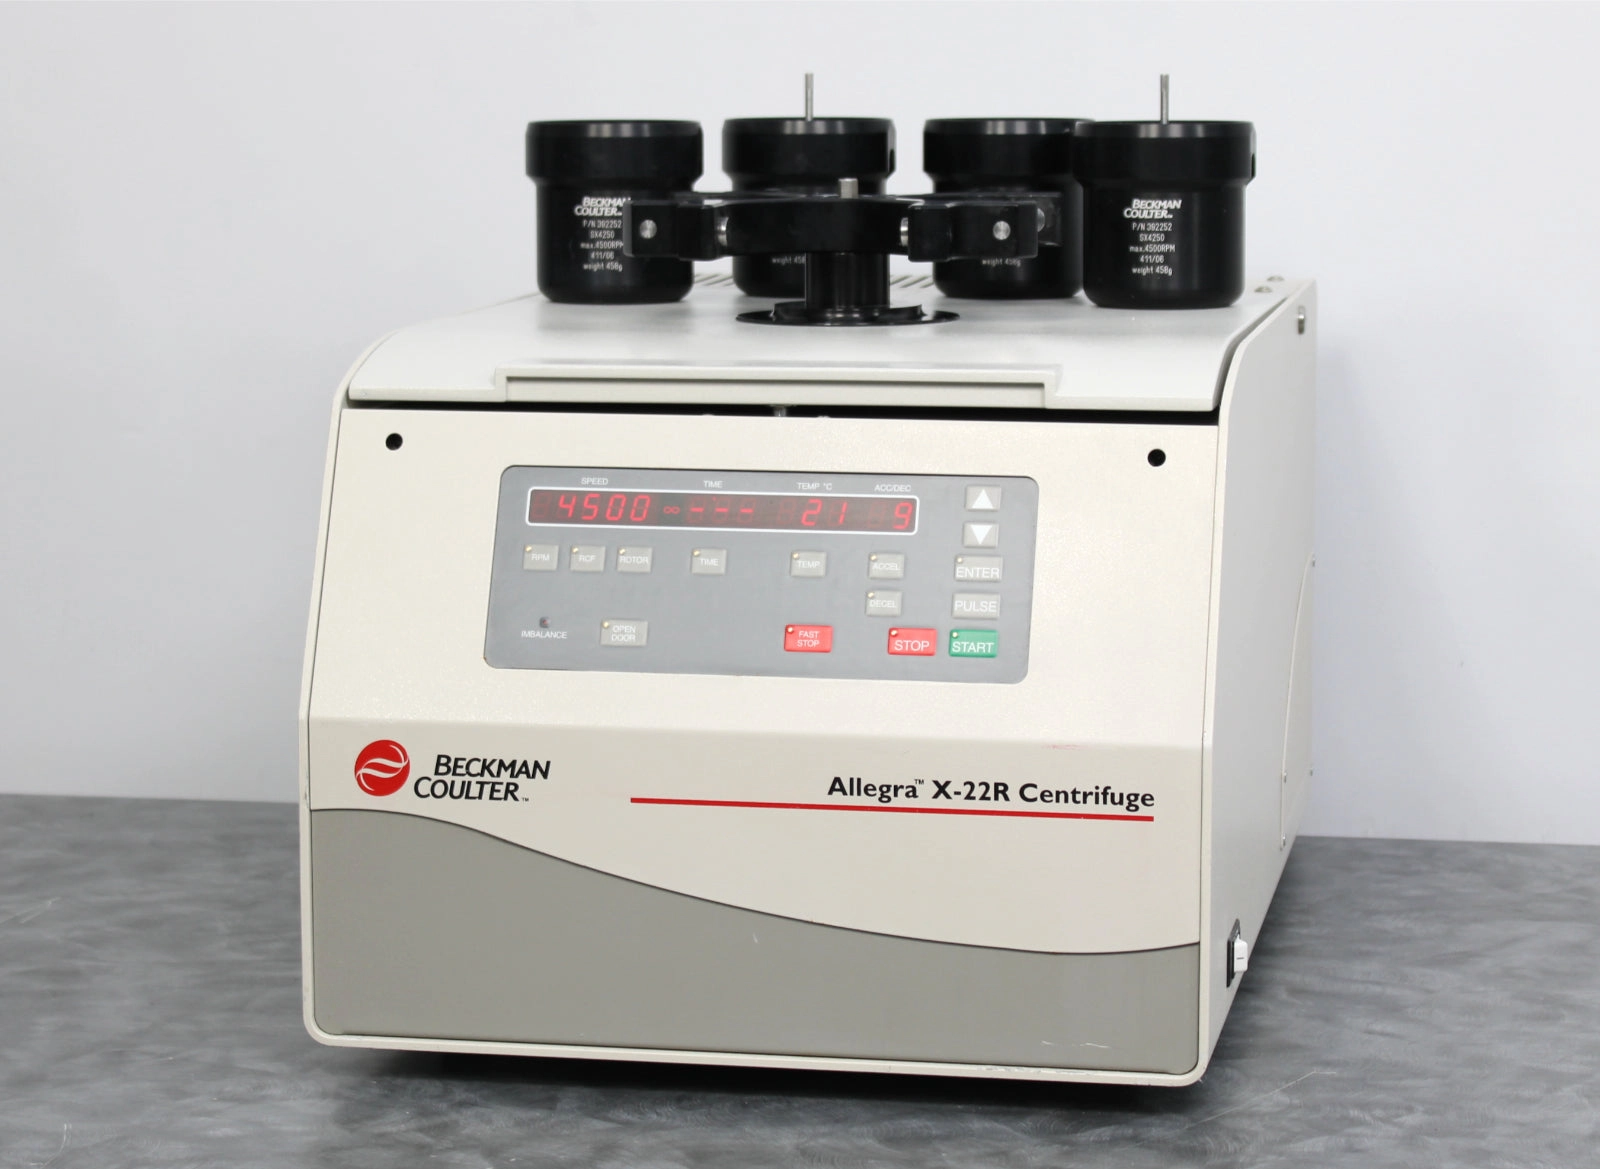 Beckman Coulter Allegra X-22R Refrigerated Benchtop Centrifuge &amp; SX4250 Rotor